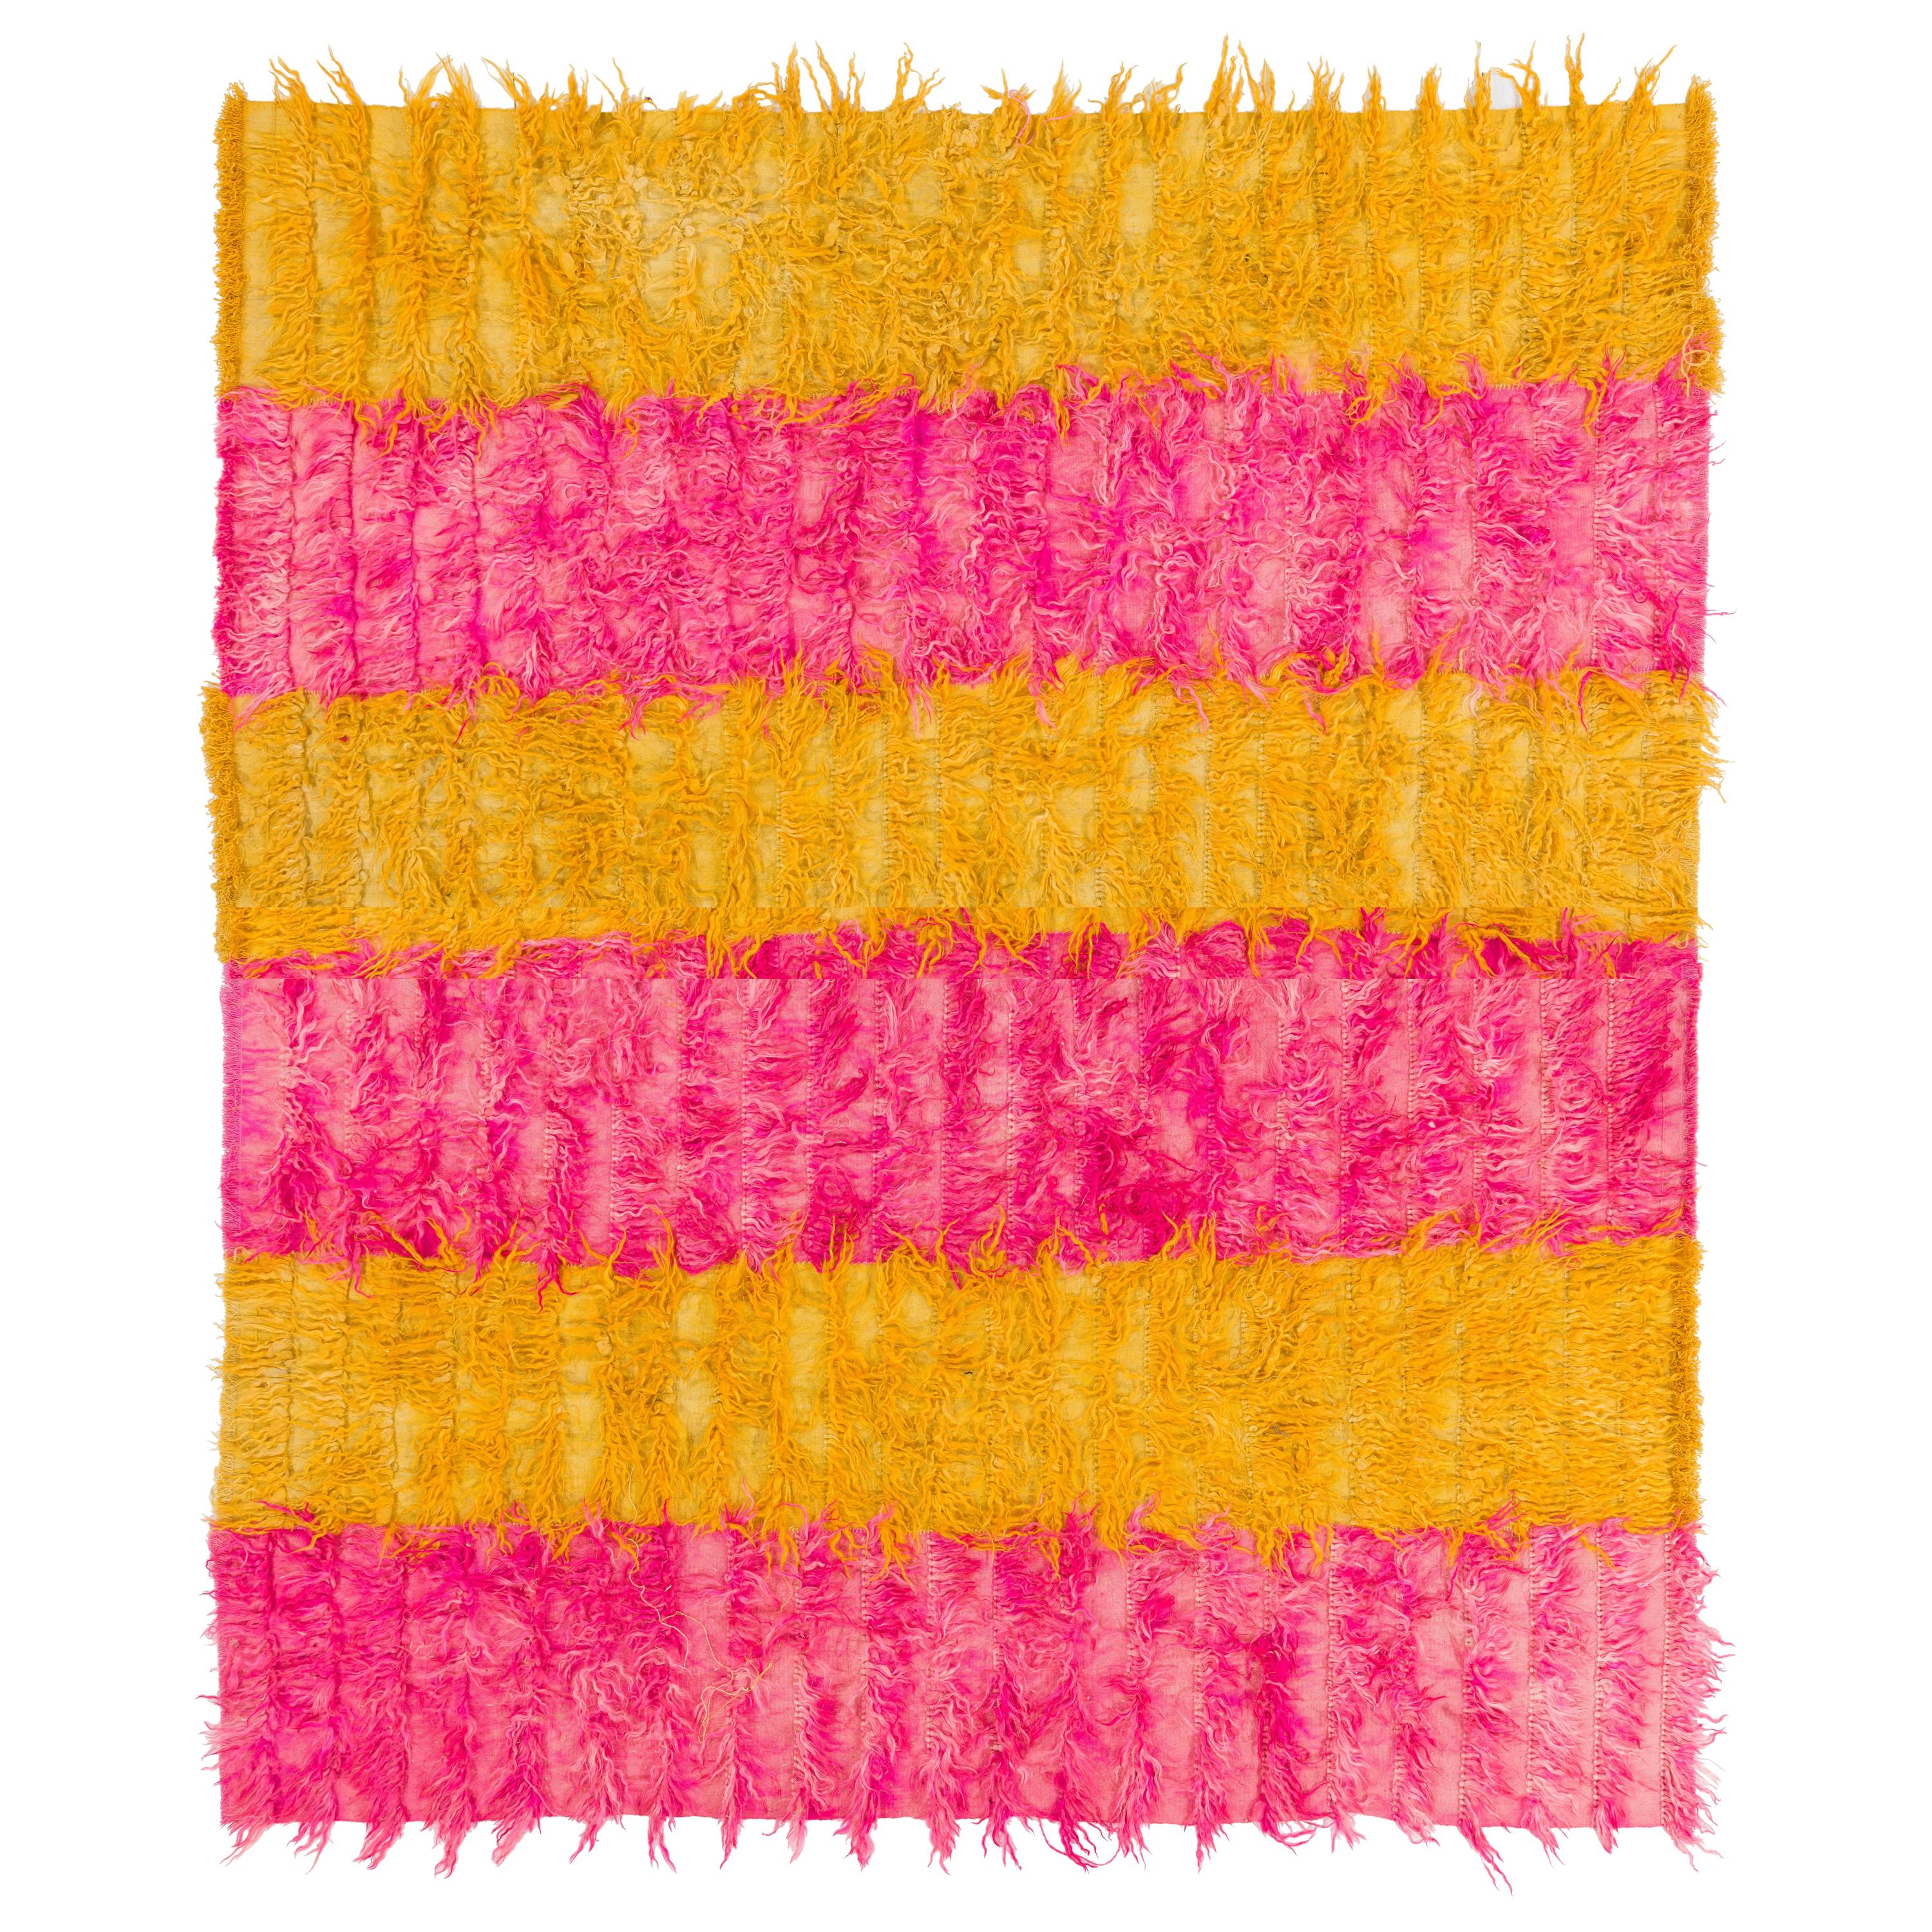 8x10 Ft Vintage Pink & Yellow Shag Pile Rug, 100% Wool. Custom Options Available